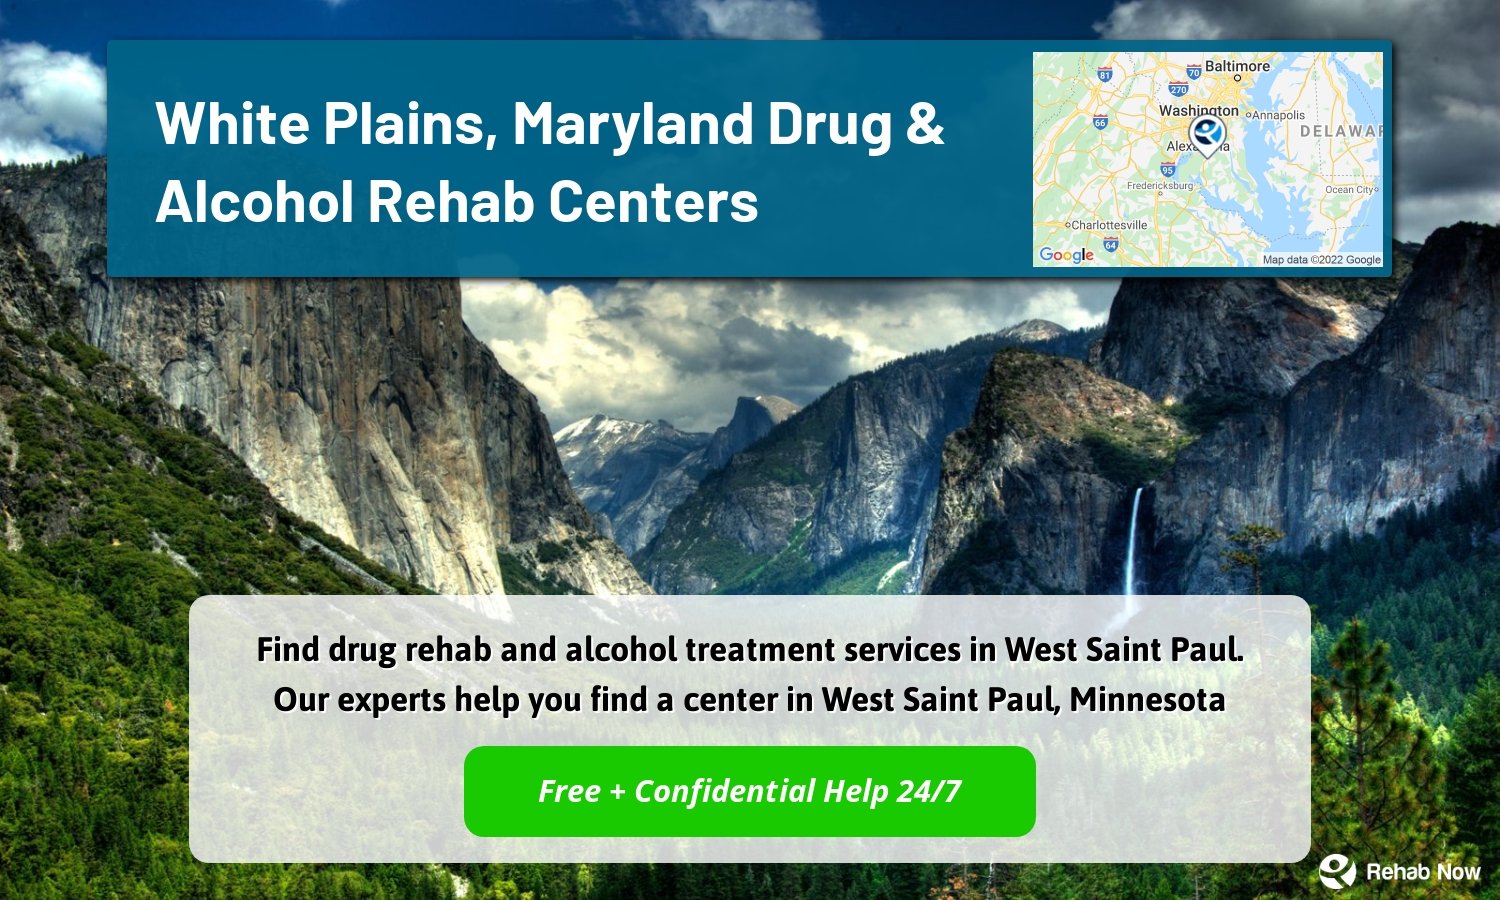 Find drug rehab and alcohol treatment services in West Saint Paul. Our experts help you find a center in West Saint Paul, Minnesota